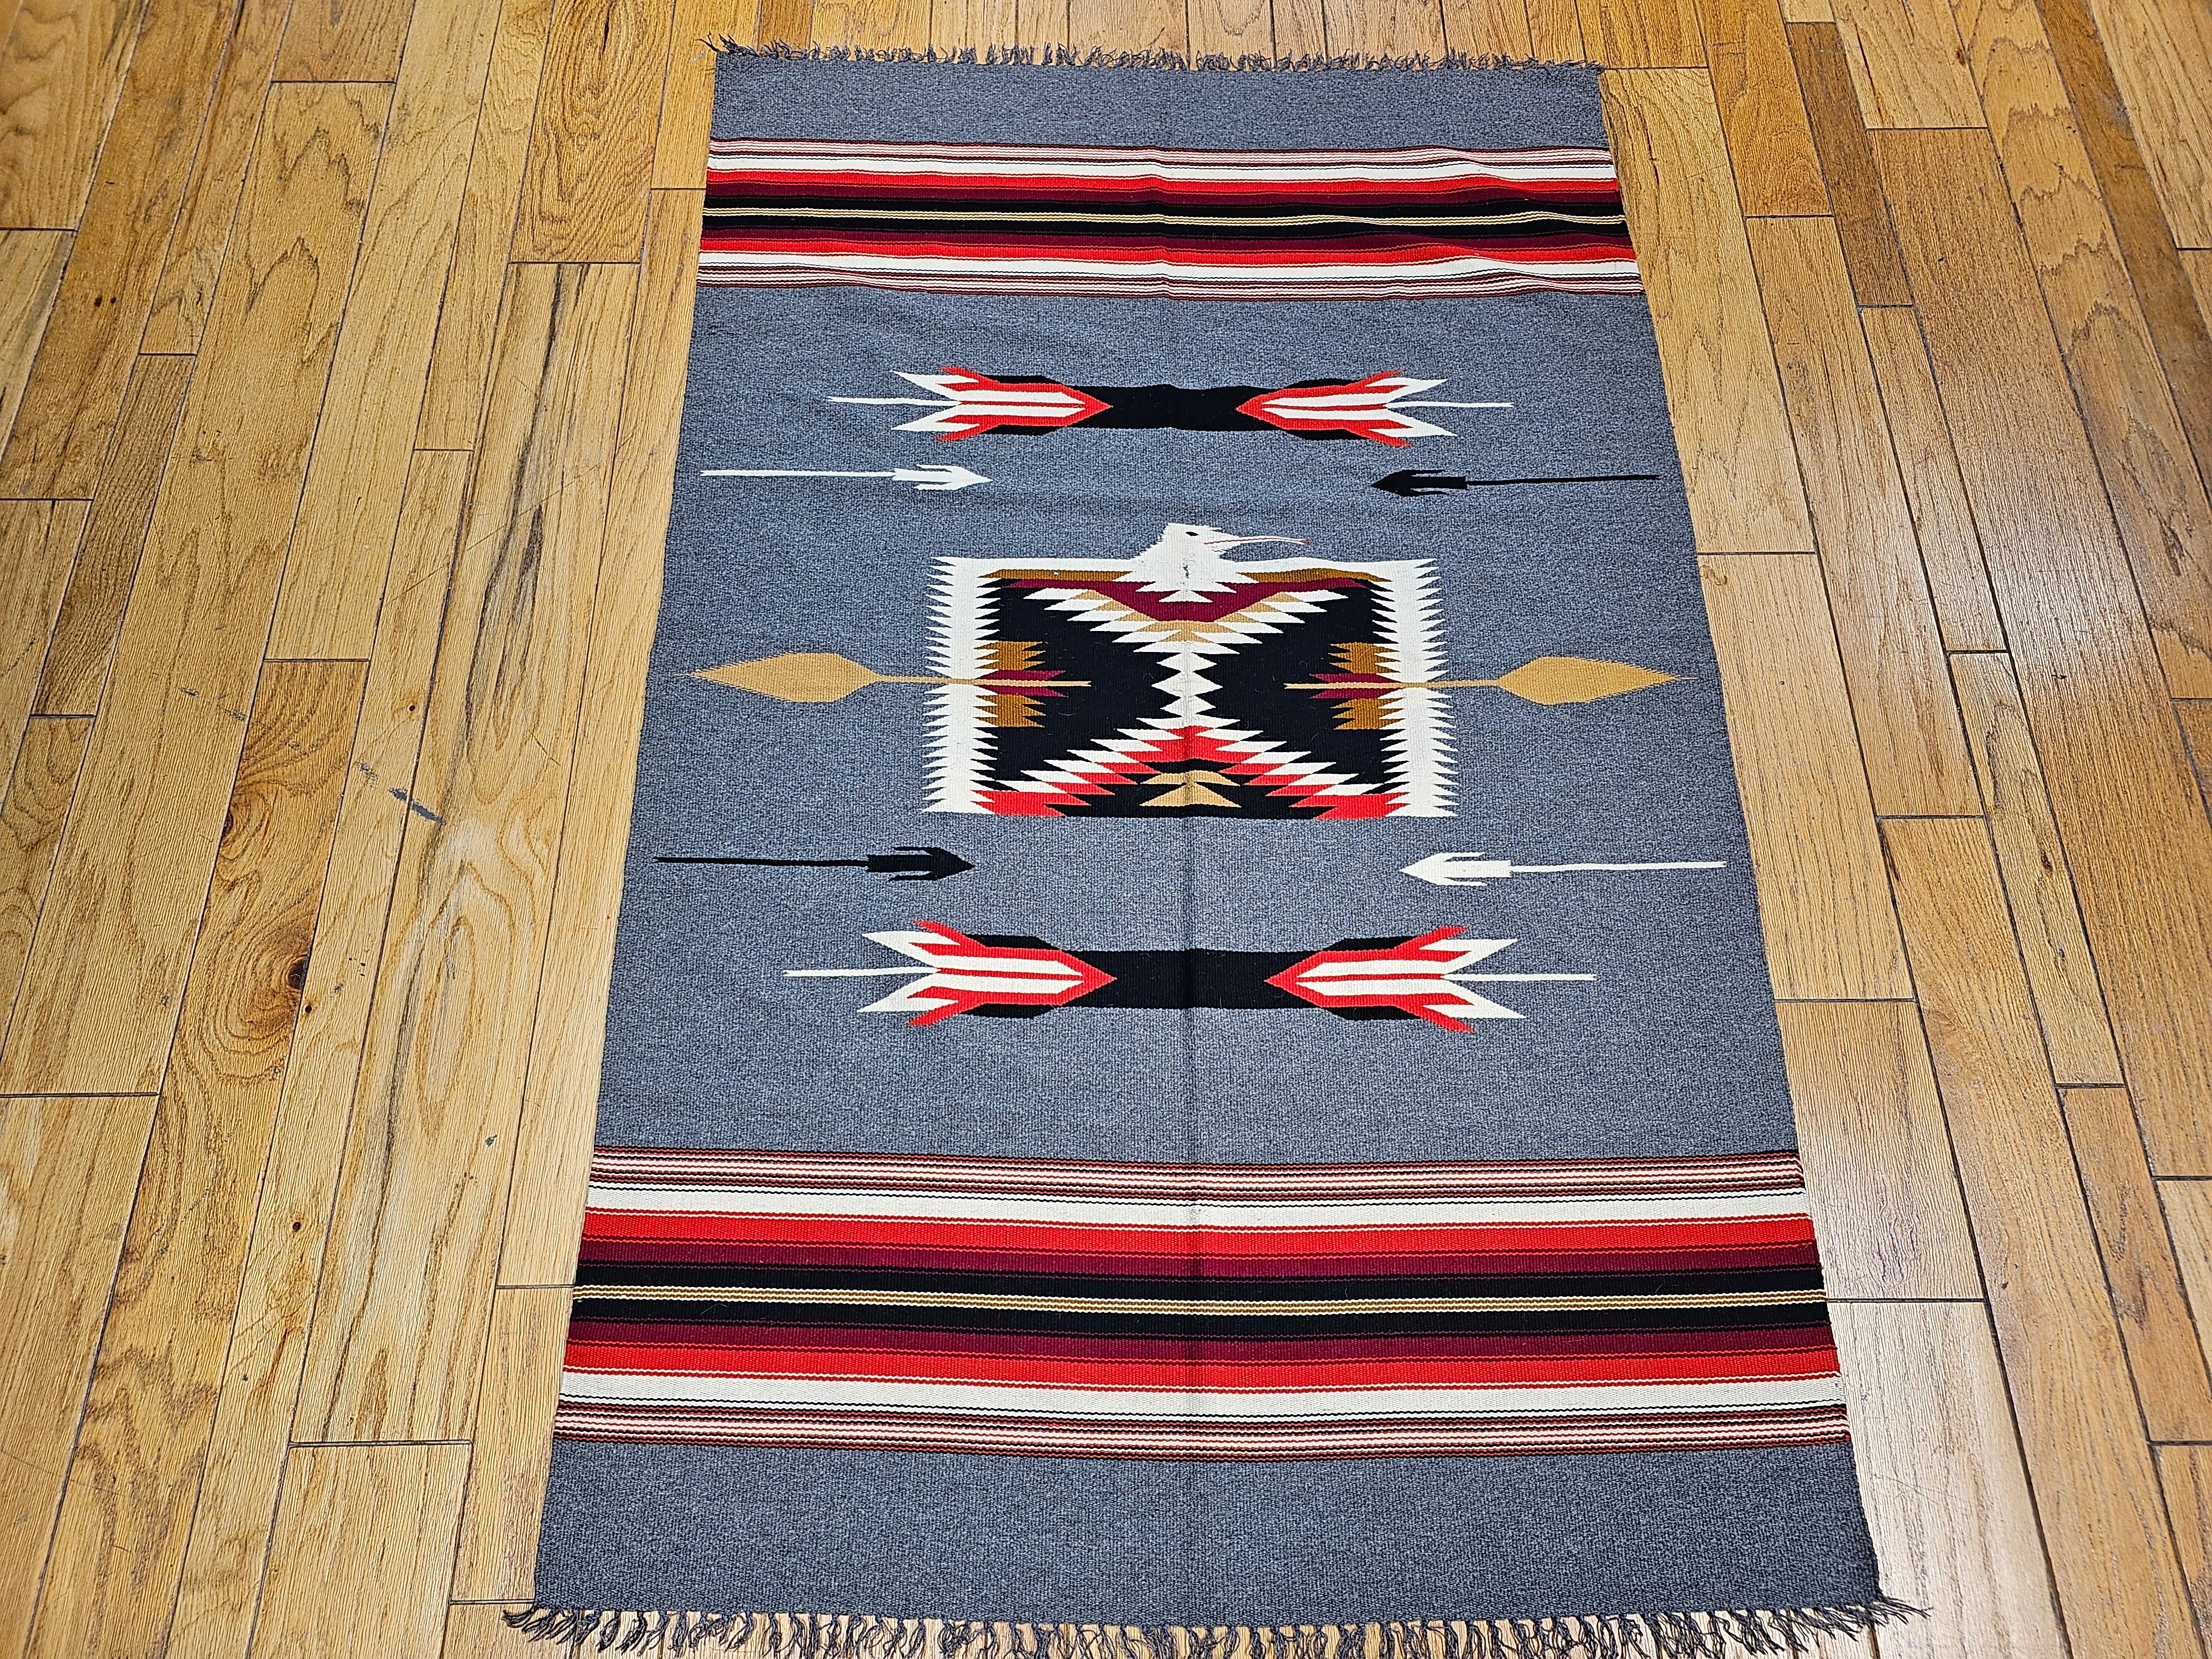 Vintage American southwestern kilim in a pale blue or Gray background from the late 1900s.    The very finely woven kilim has a beautiful pale blue or gray background color with stripes in the top and bottom of the kilim in red, ivory, black. There